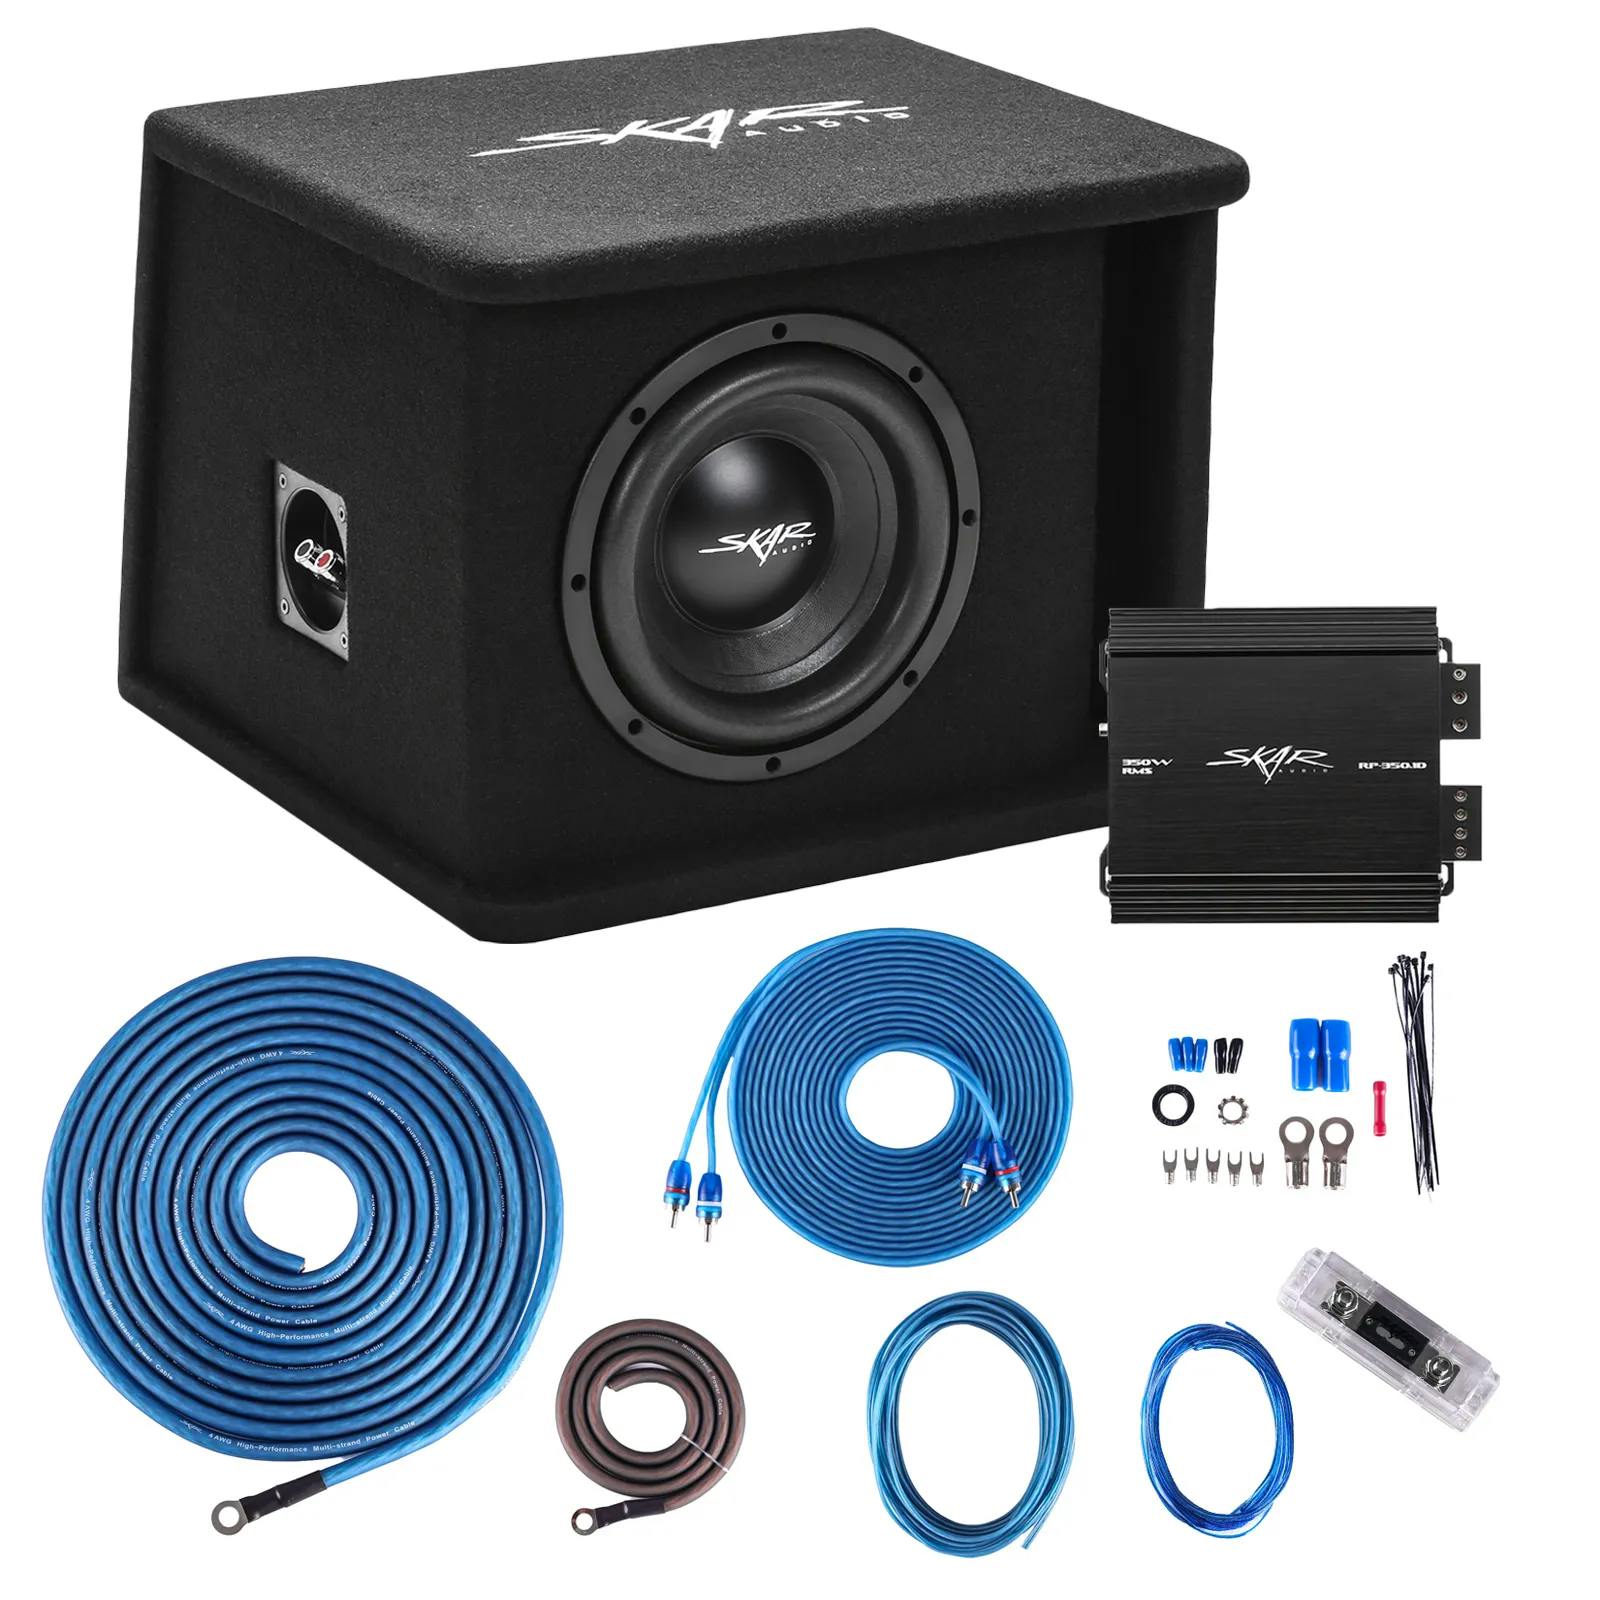 Featured Product Photo for Single 8" 700 Watt SDR Series Complete Subwoofer Package with Vented Enclosure and Amplifier